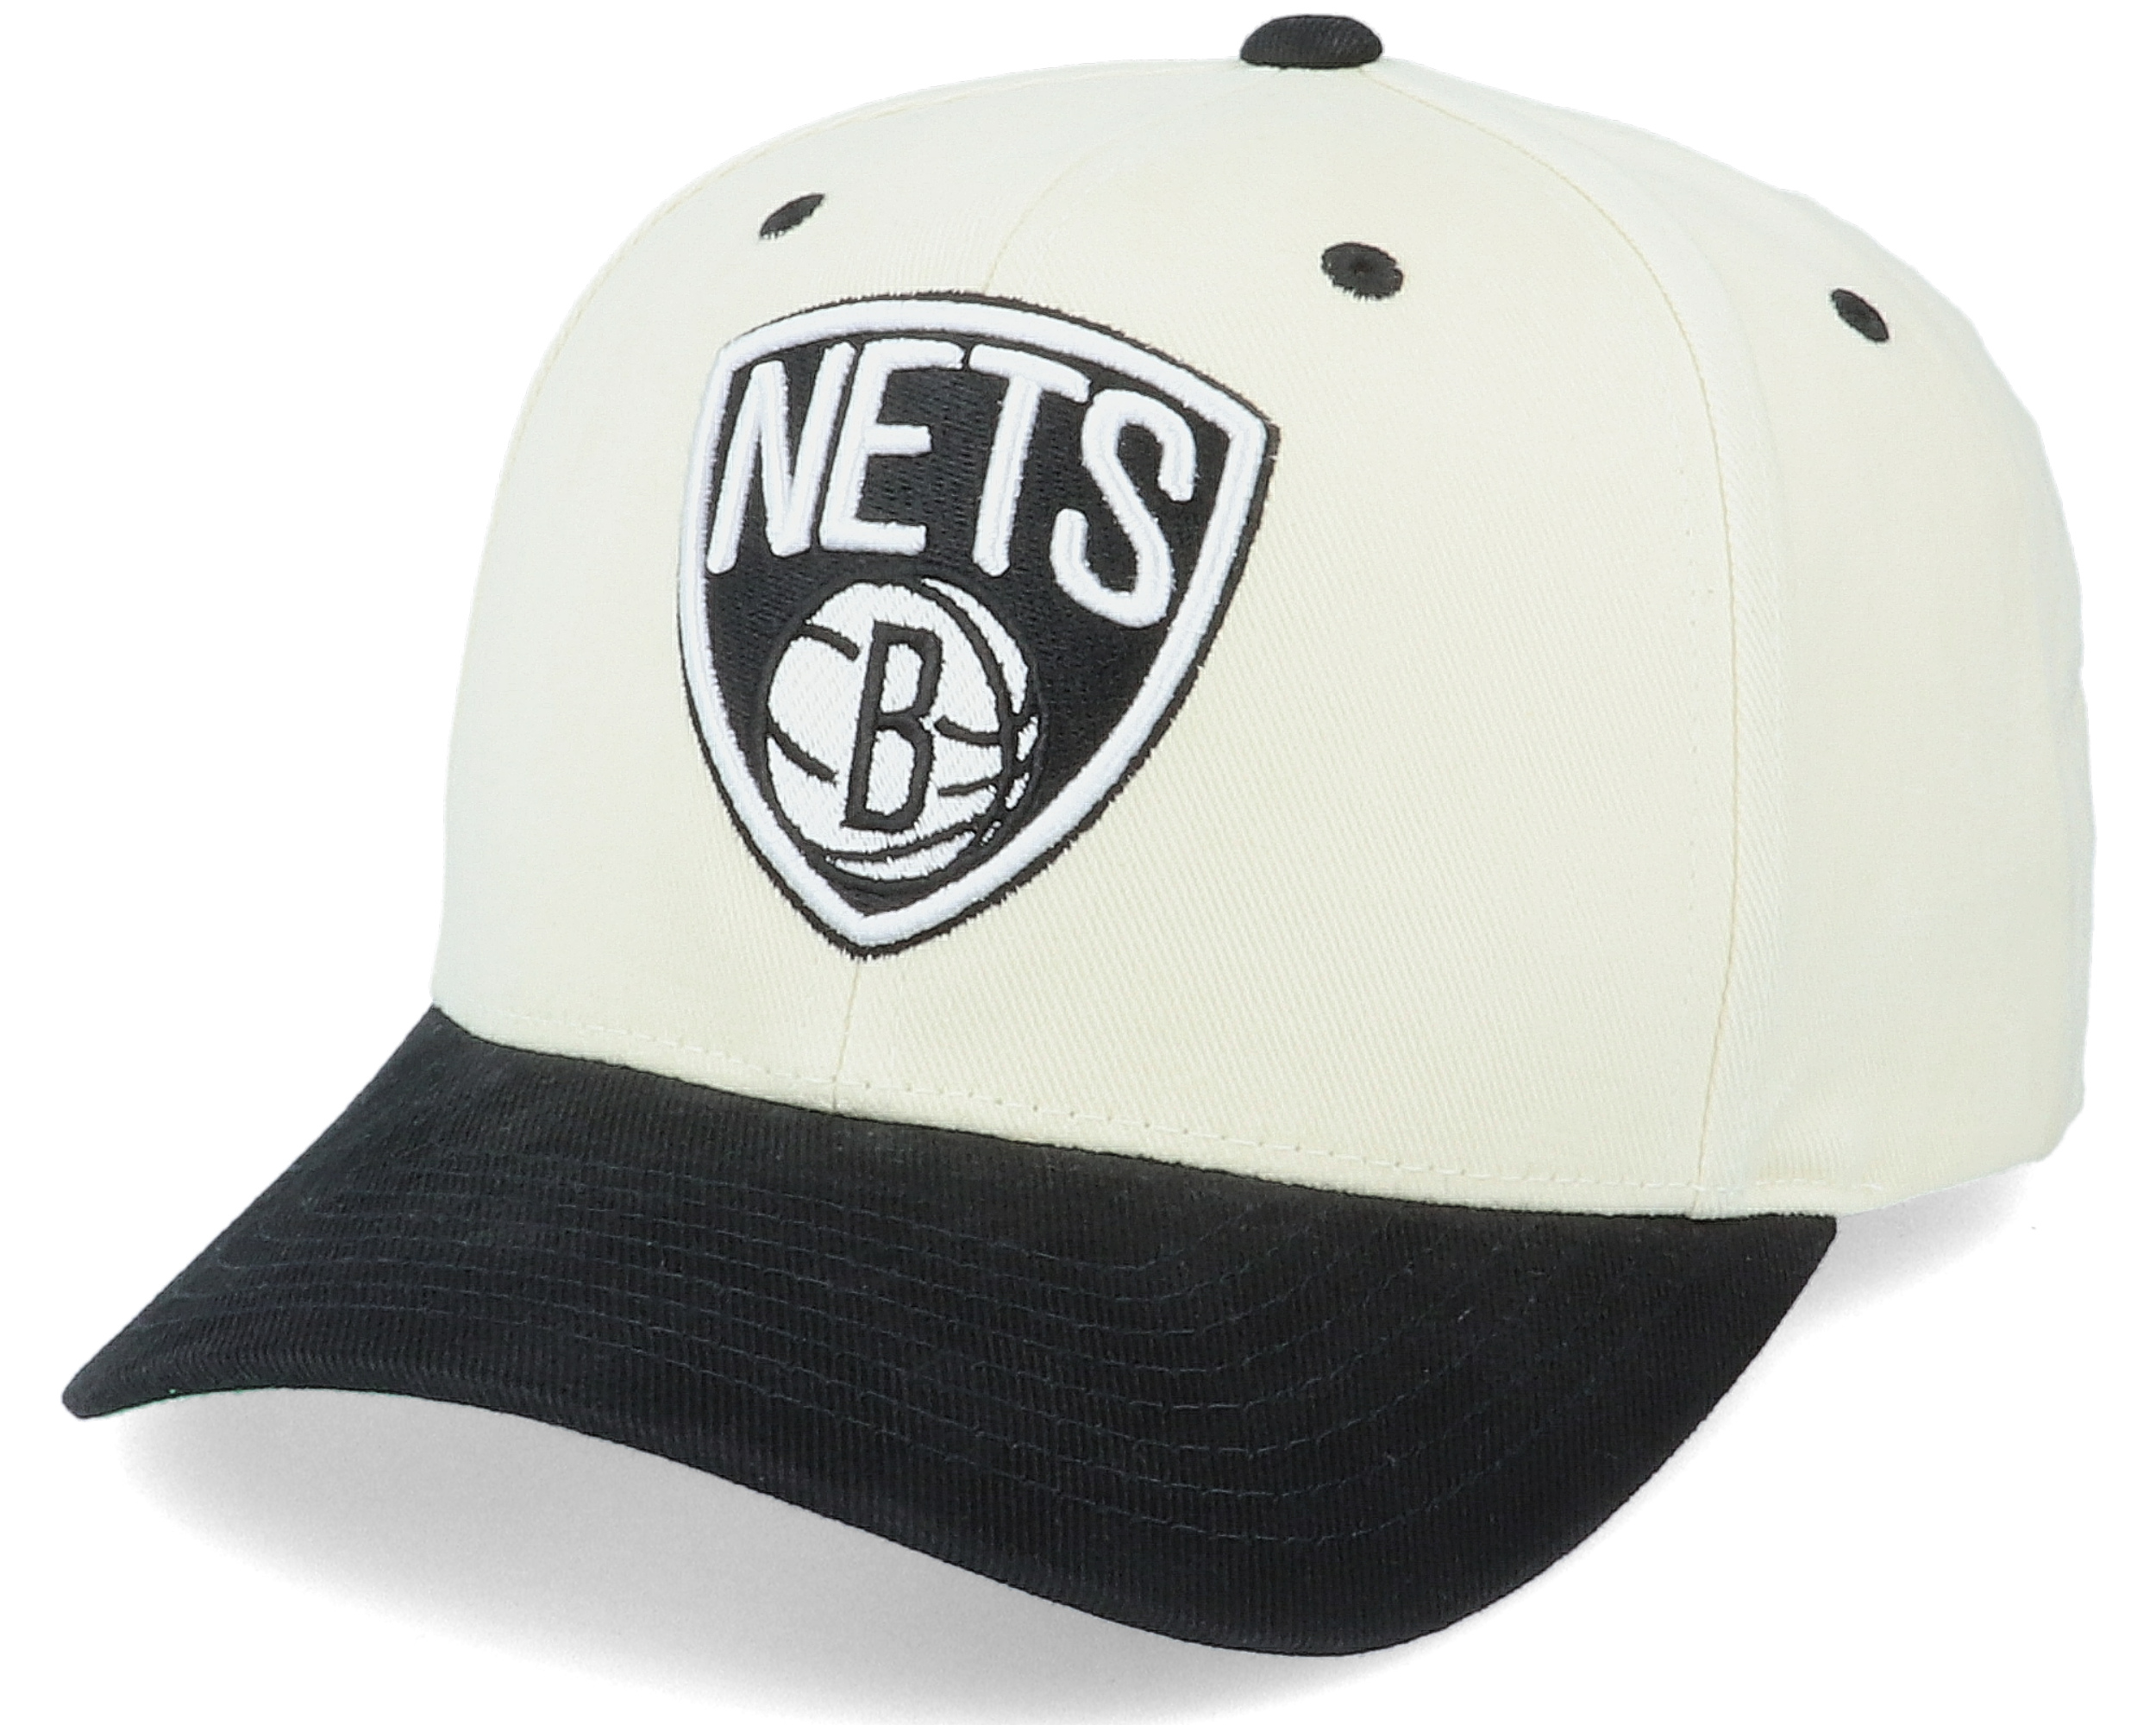 Brooklyn Nets Pro Crown White/Black Adjustable - Mitchell & Ness caps ...